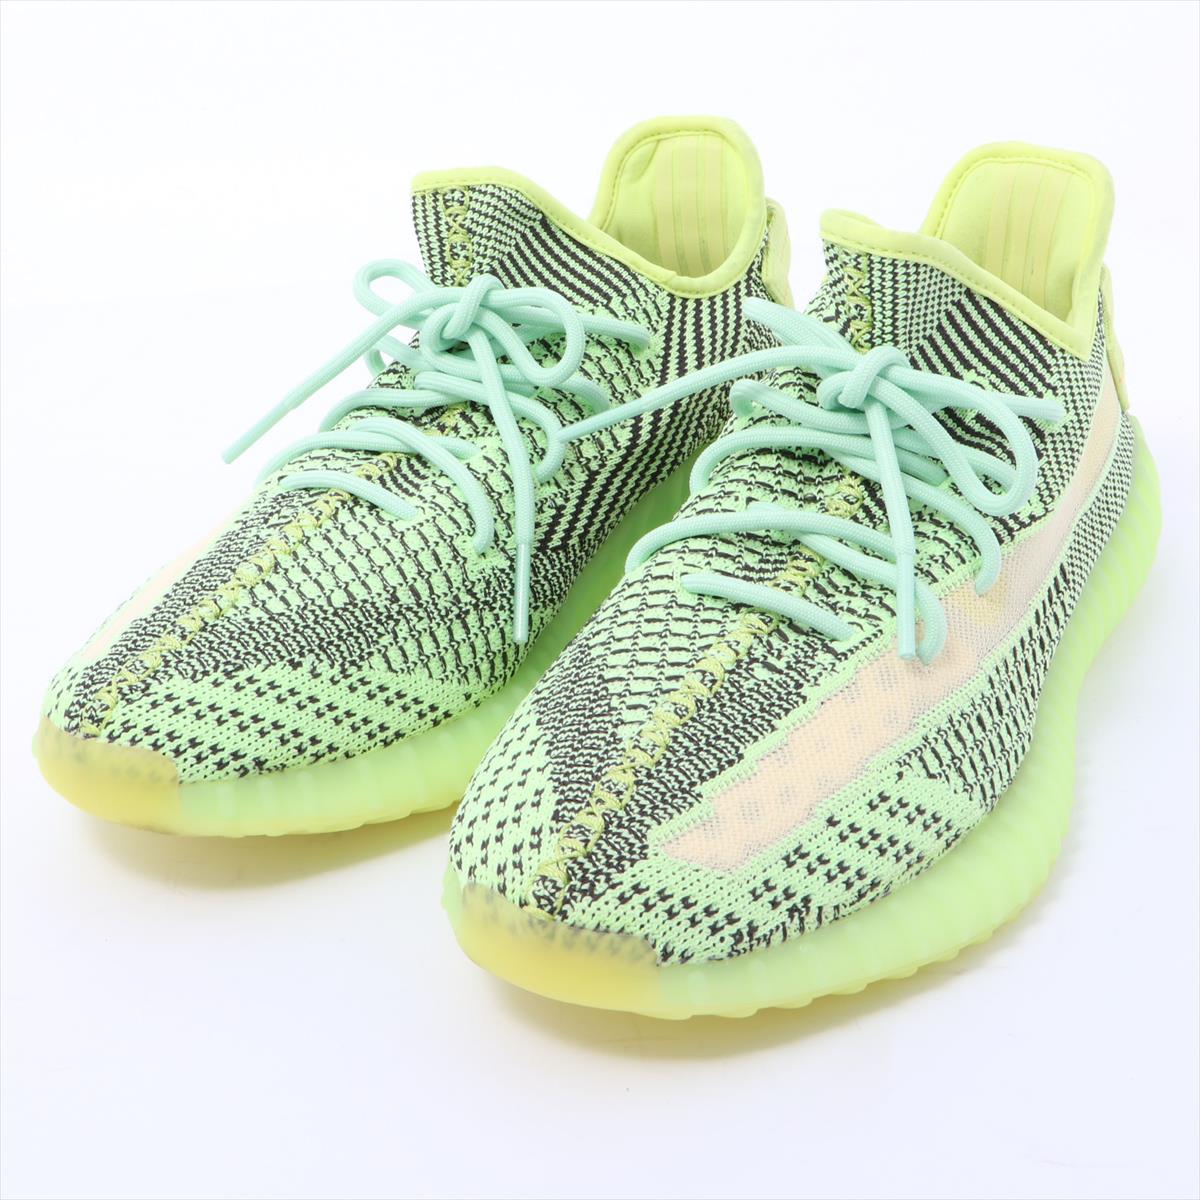 yeezy boost 350 lime